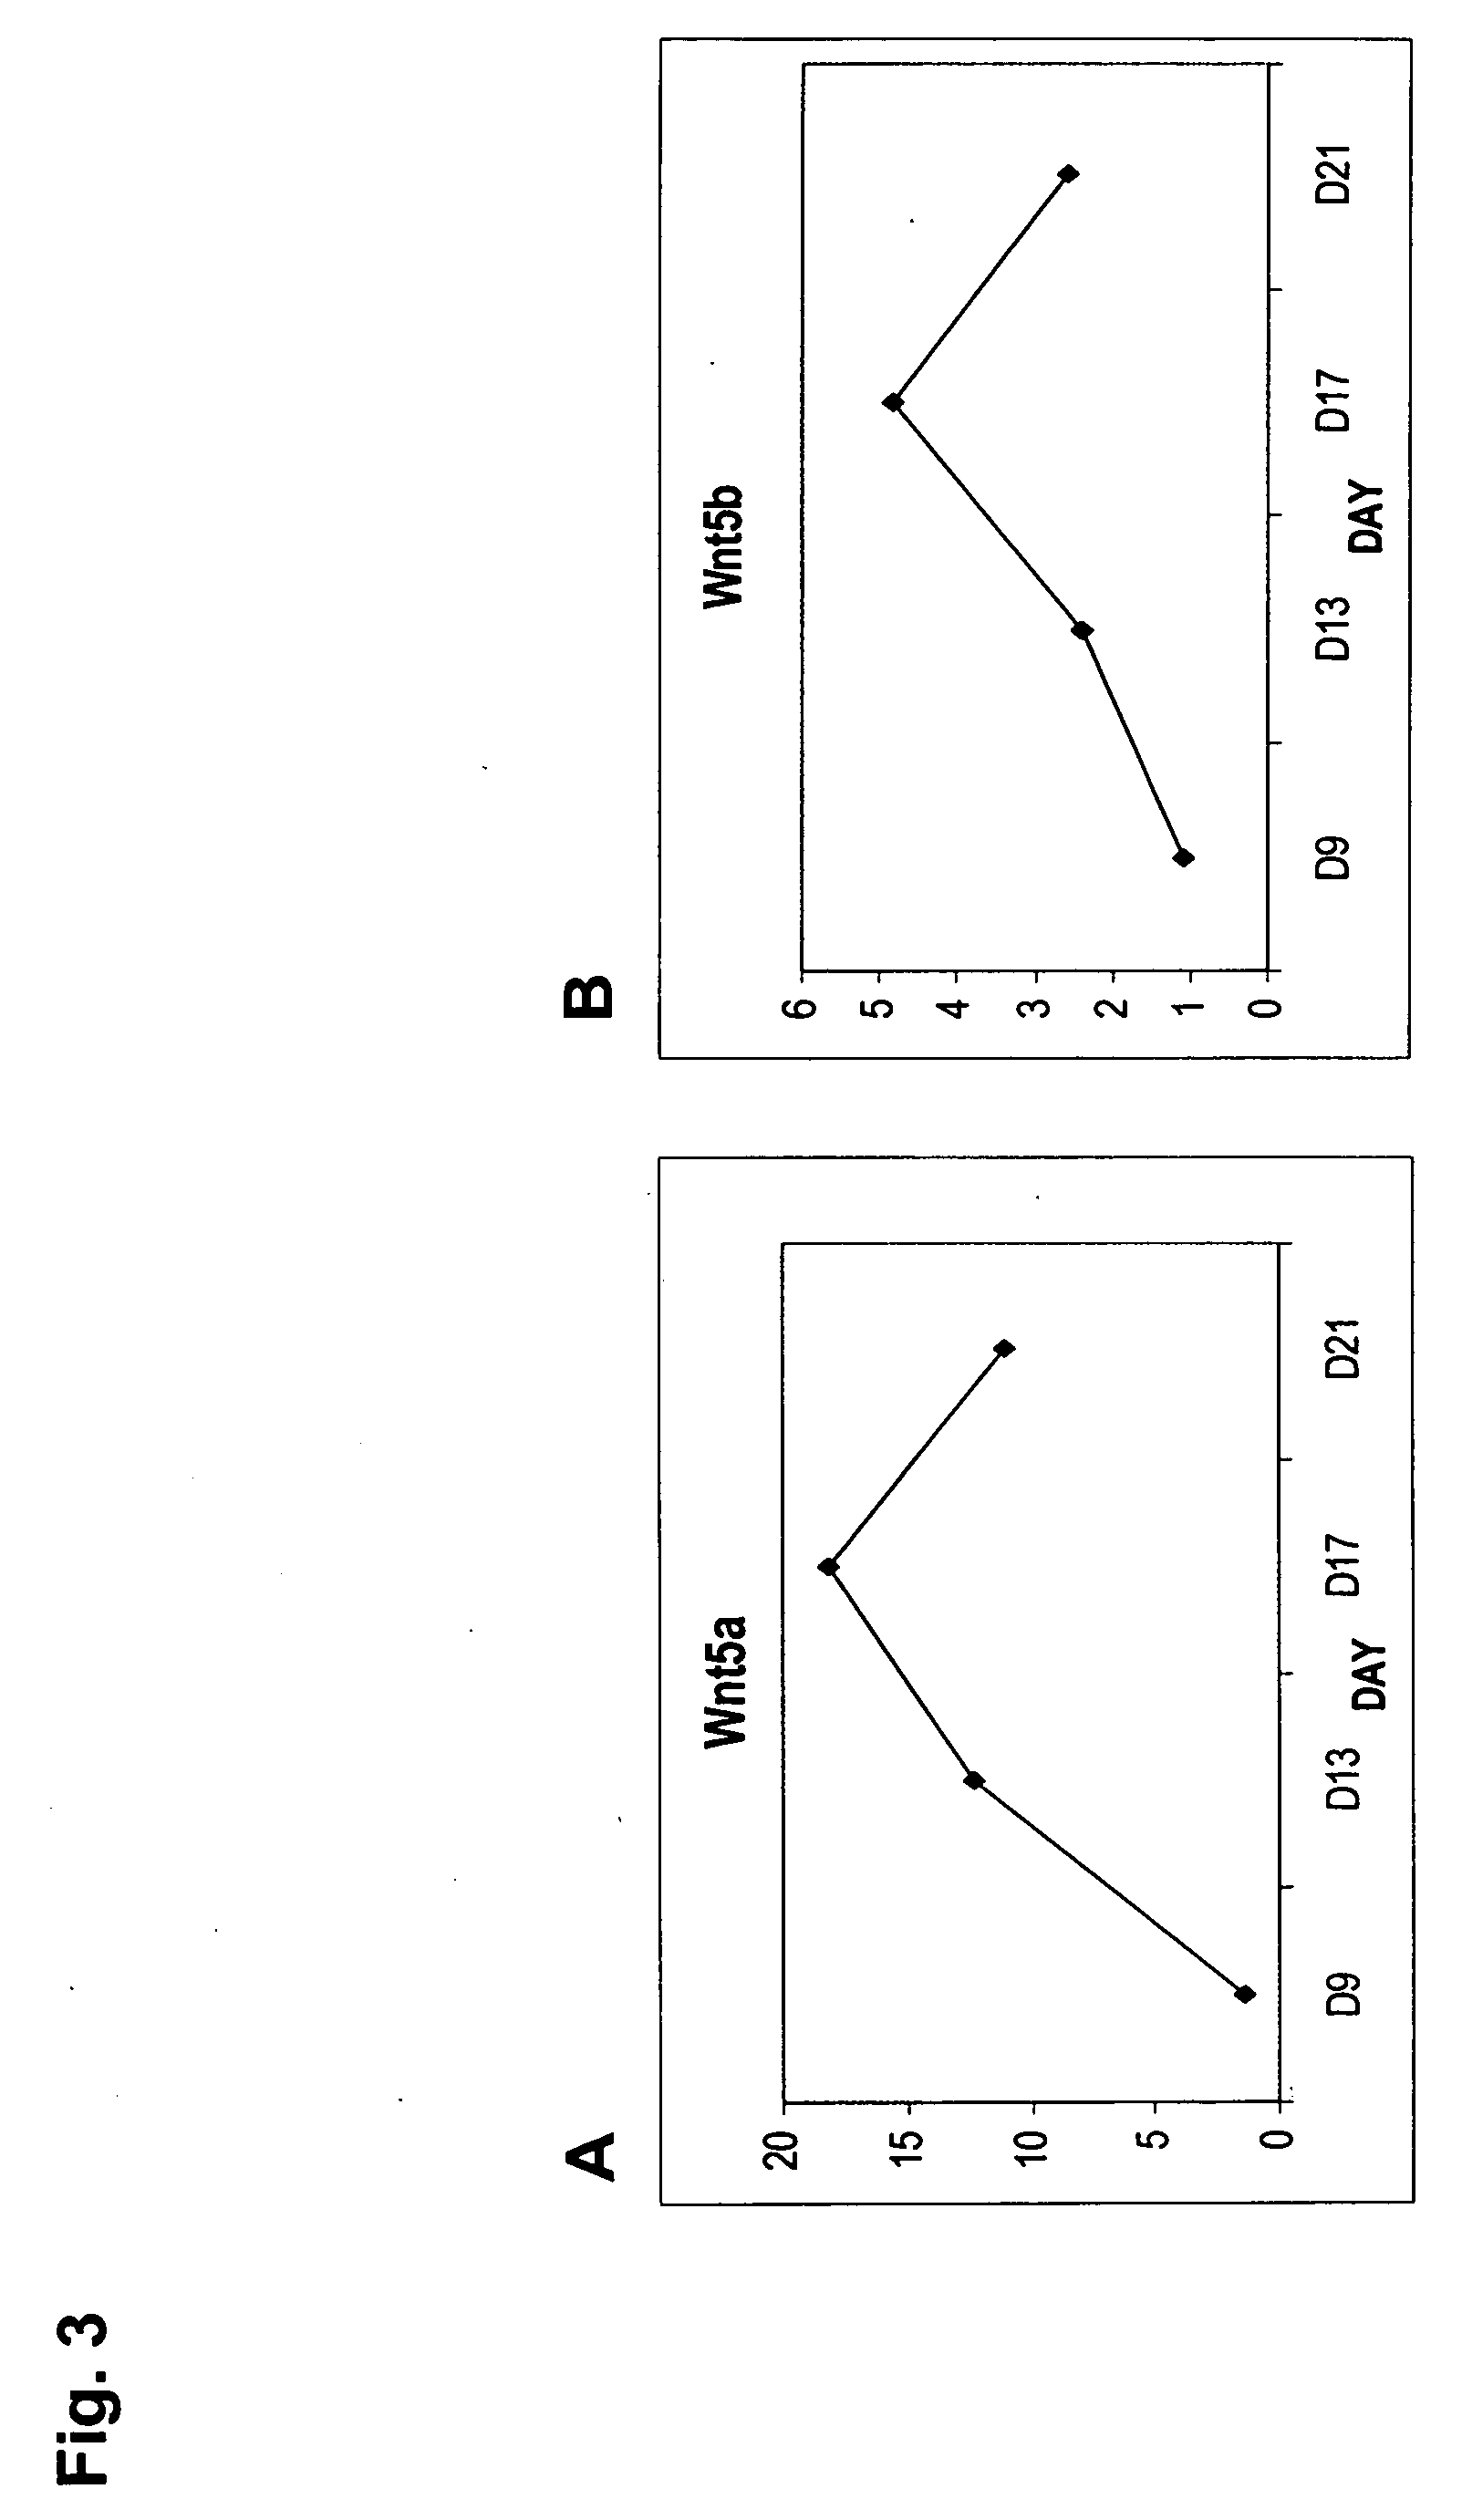 Compositions and methods for the stimulation or enhancement of bone formation and the self-renewal of cells